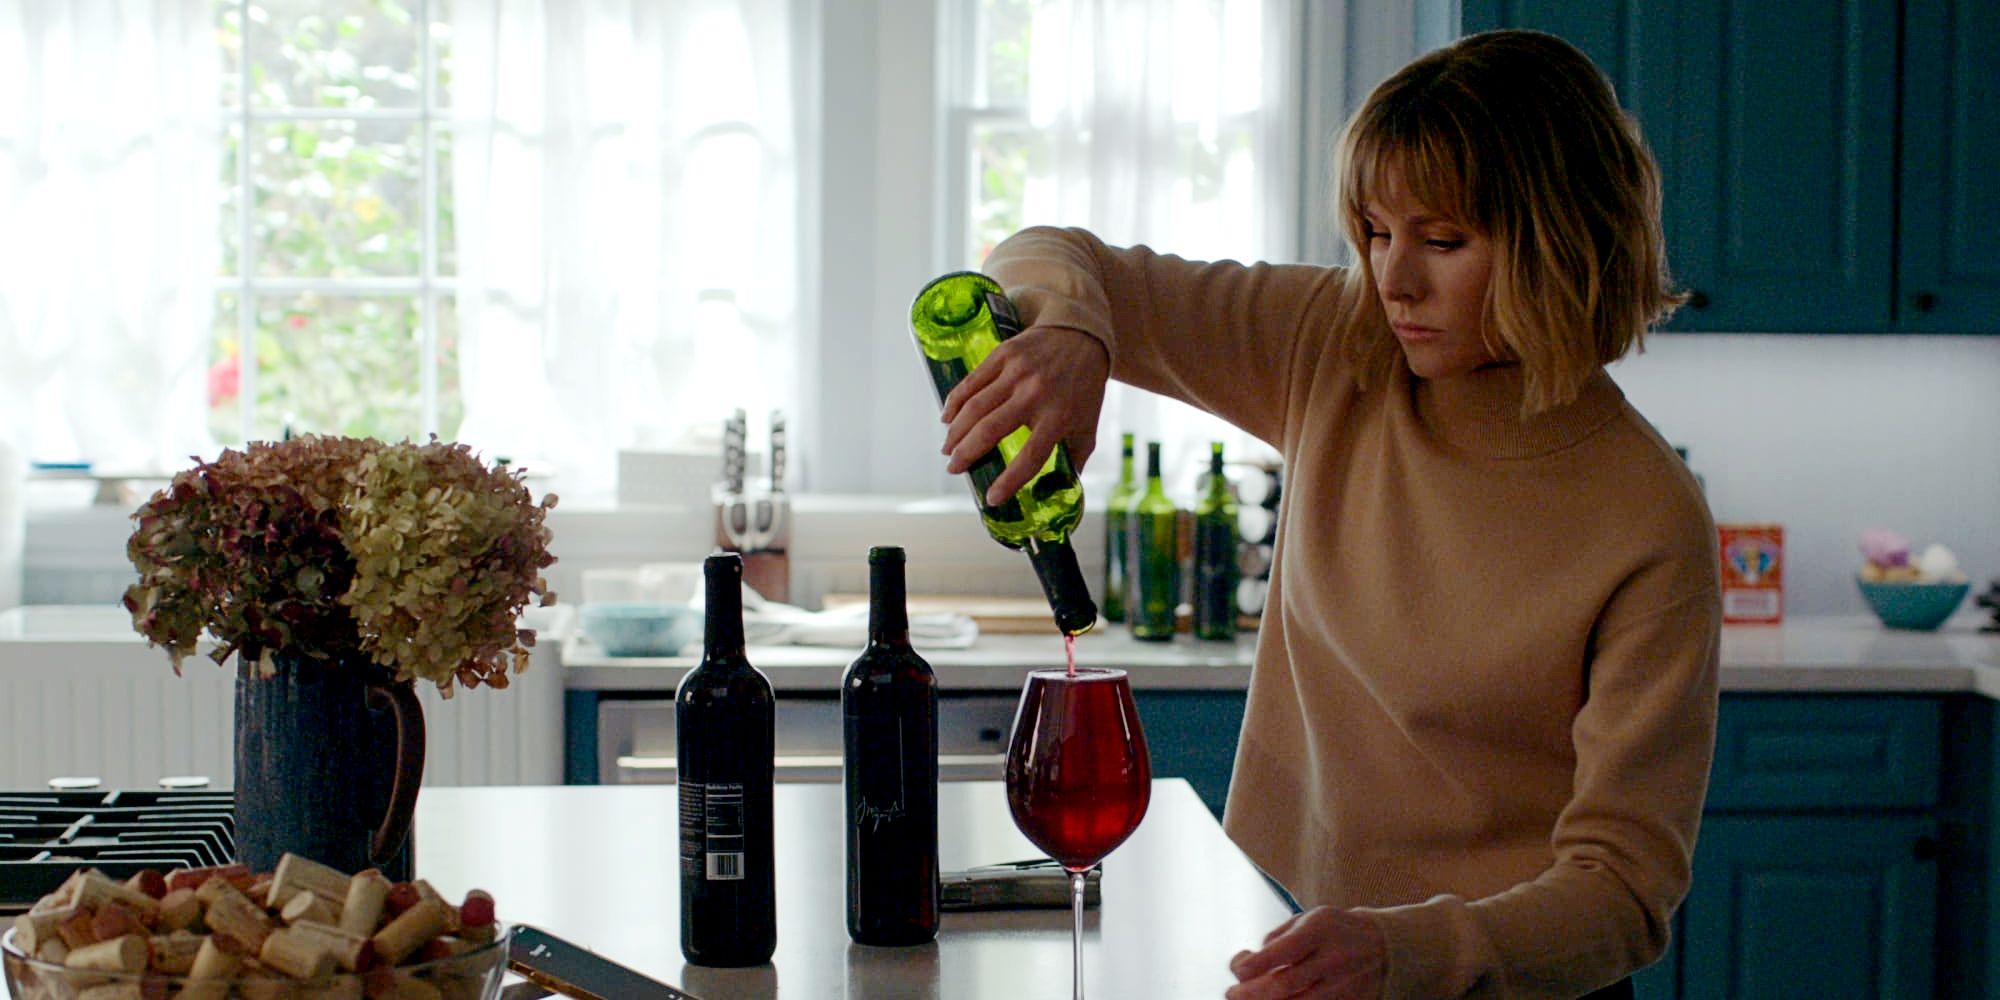 Anna pouring wine in The Woman in the House.